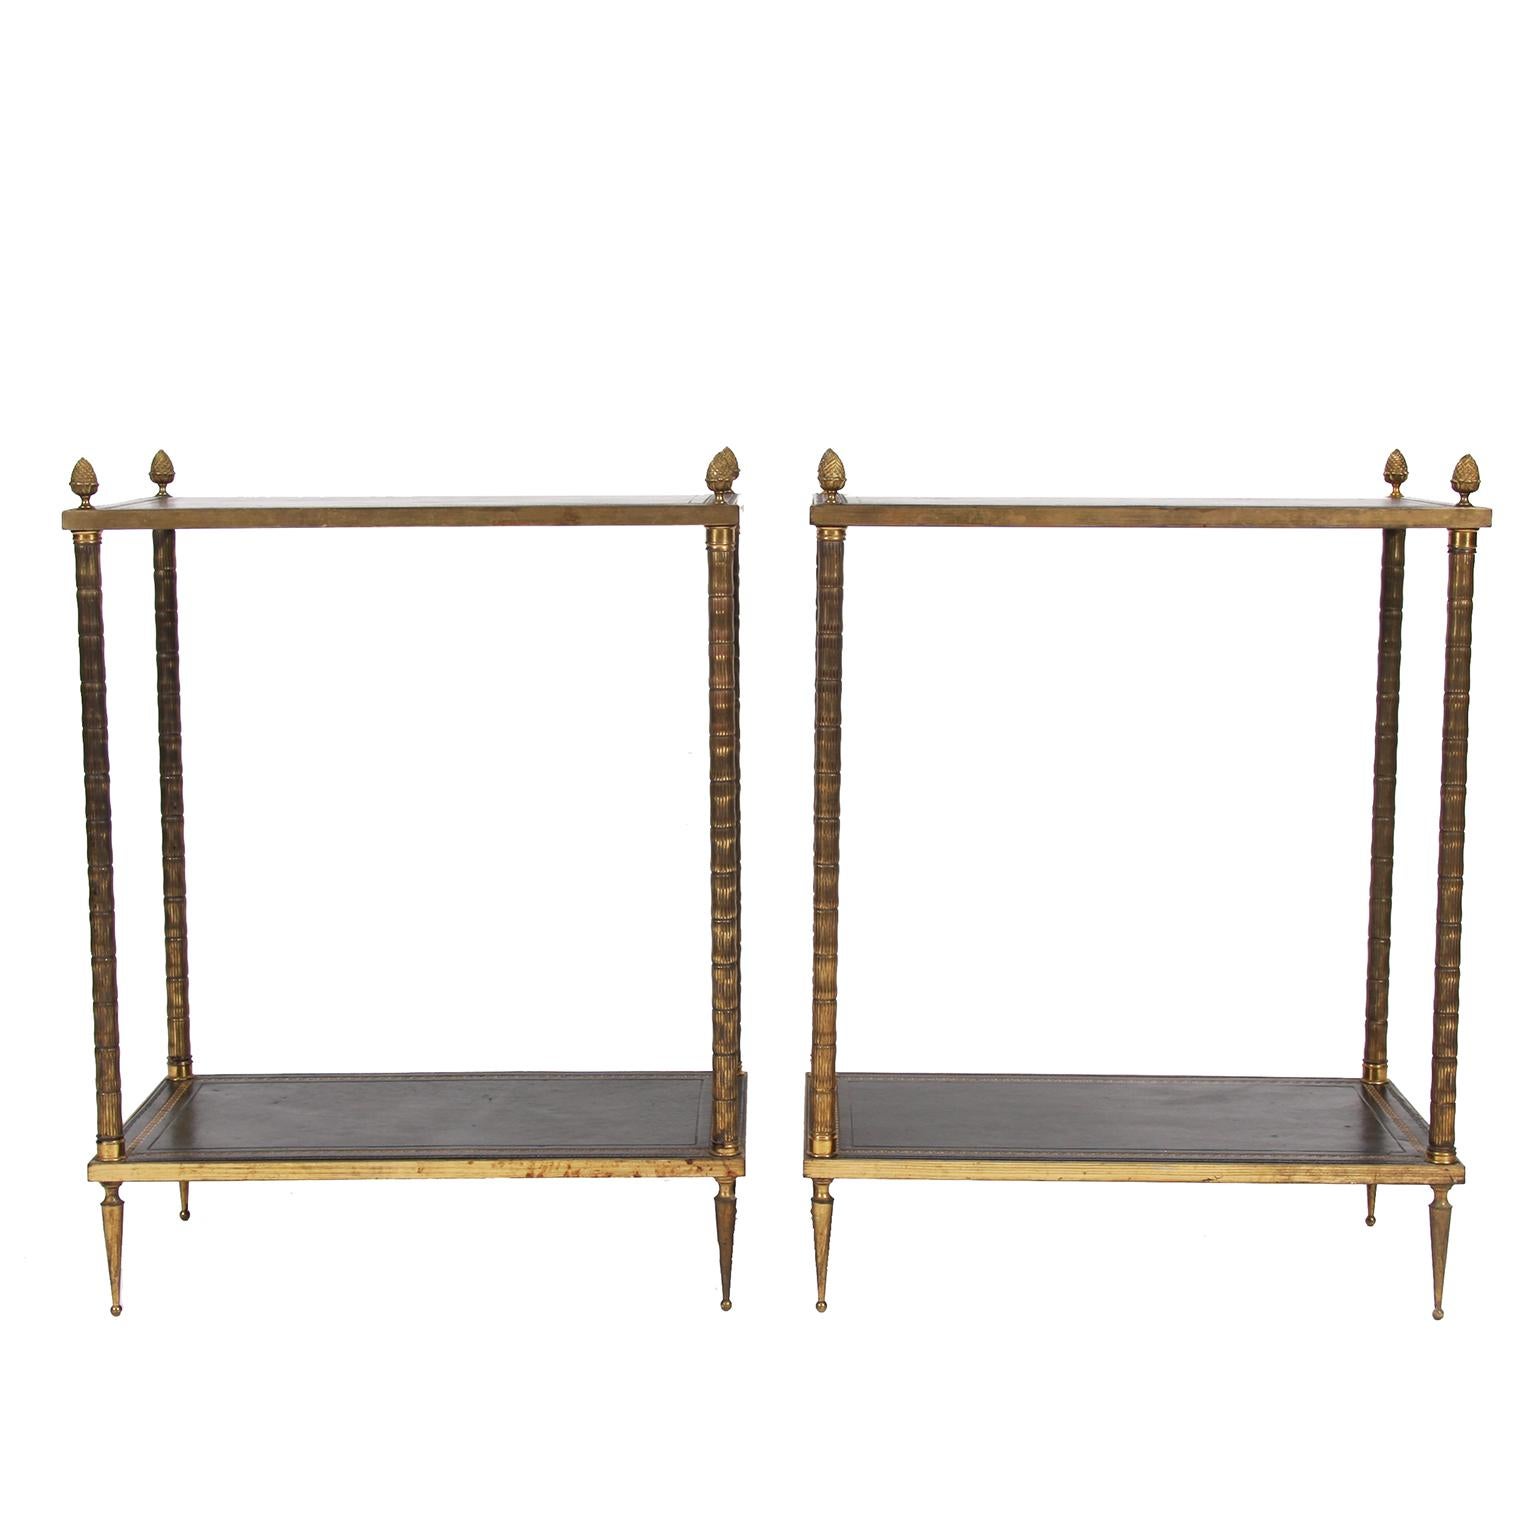 French, 1960s

A super quality pair of two-tier, leather top, side tables. With brass faux bamboo legs. 

Attributed to Bagues. 

With Greek key design on the leather. Lovely casting with pineapple finials. 

Excellent quality, rare and